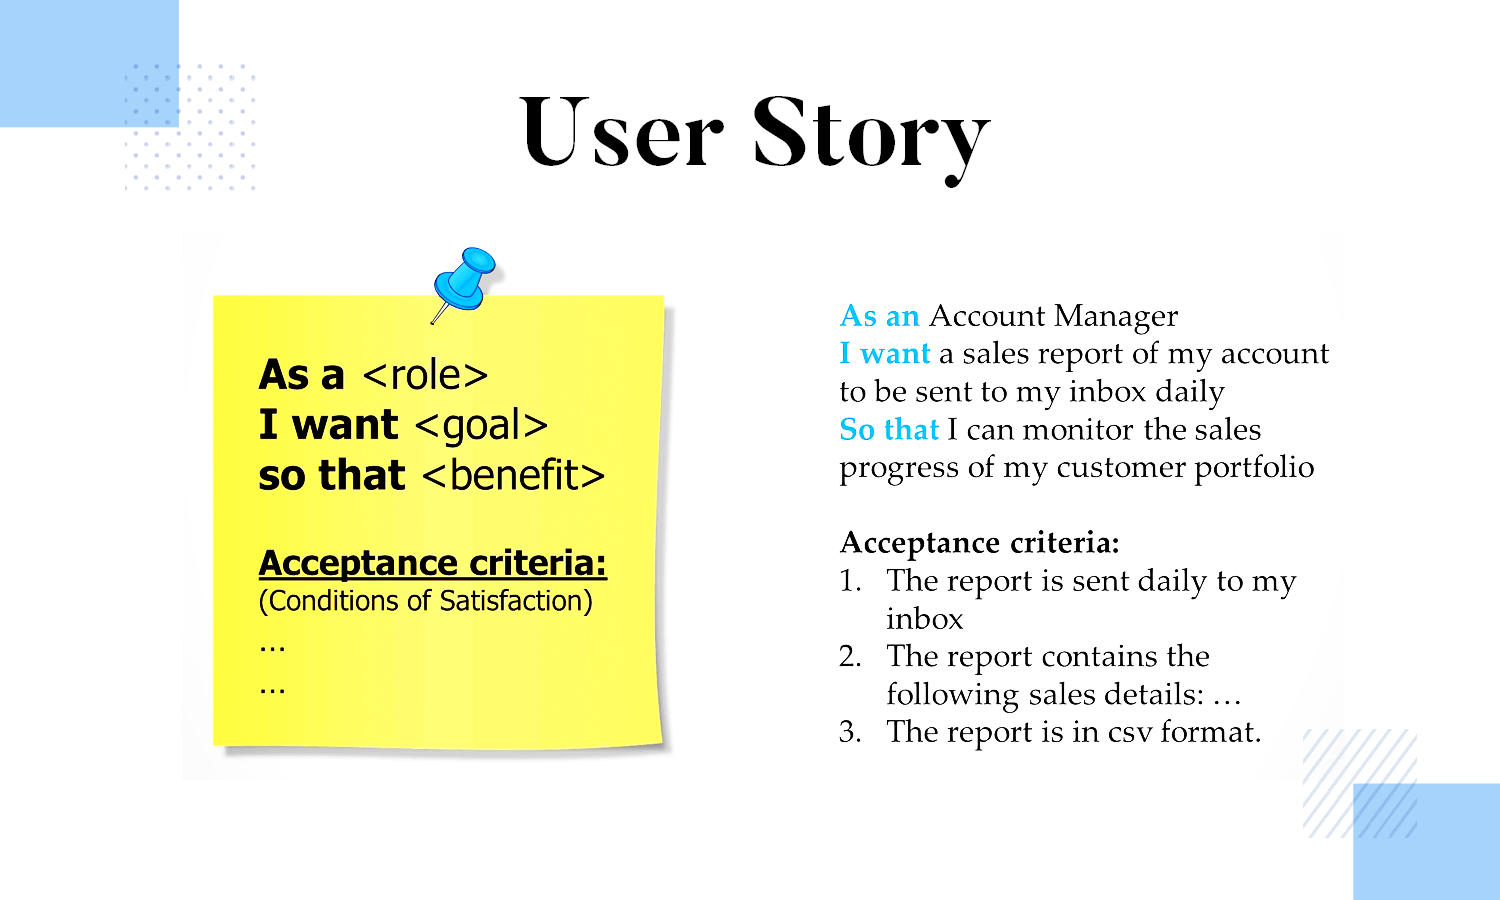 https://assets.justinmind.com/wp-content/uploads/2020/09/user-story-examples-agile-usa.png